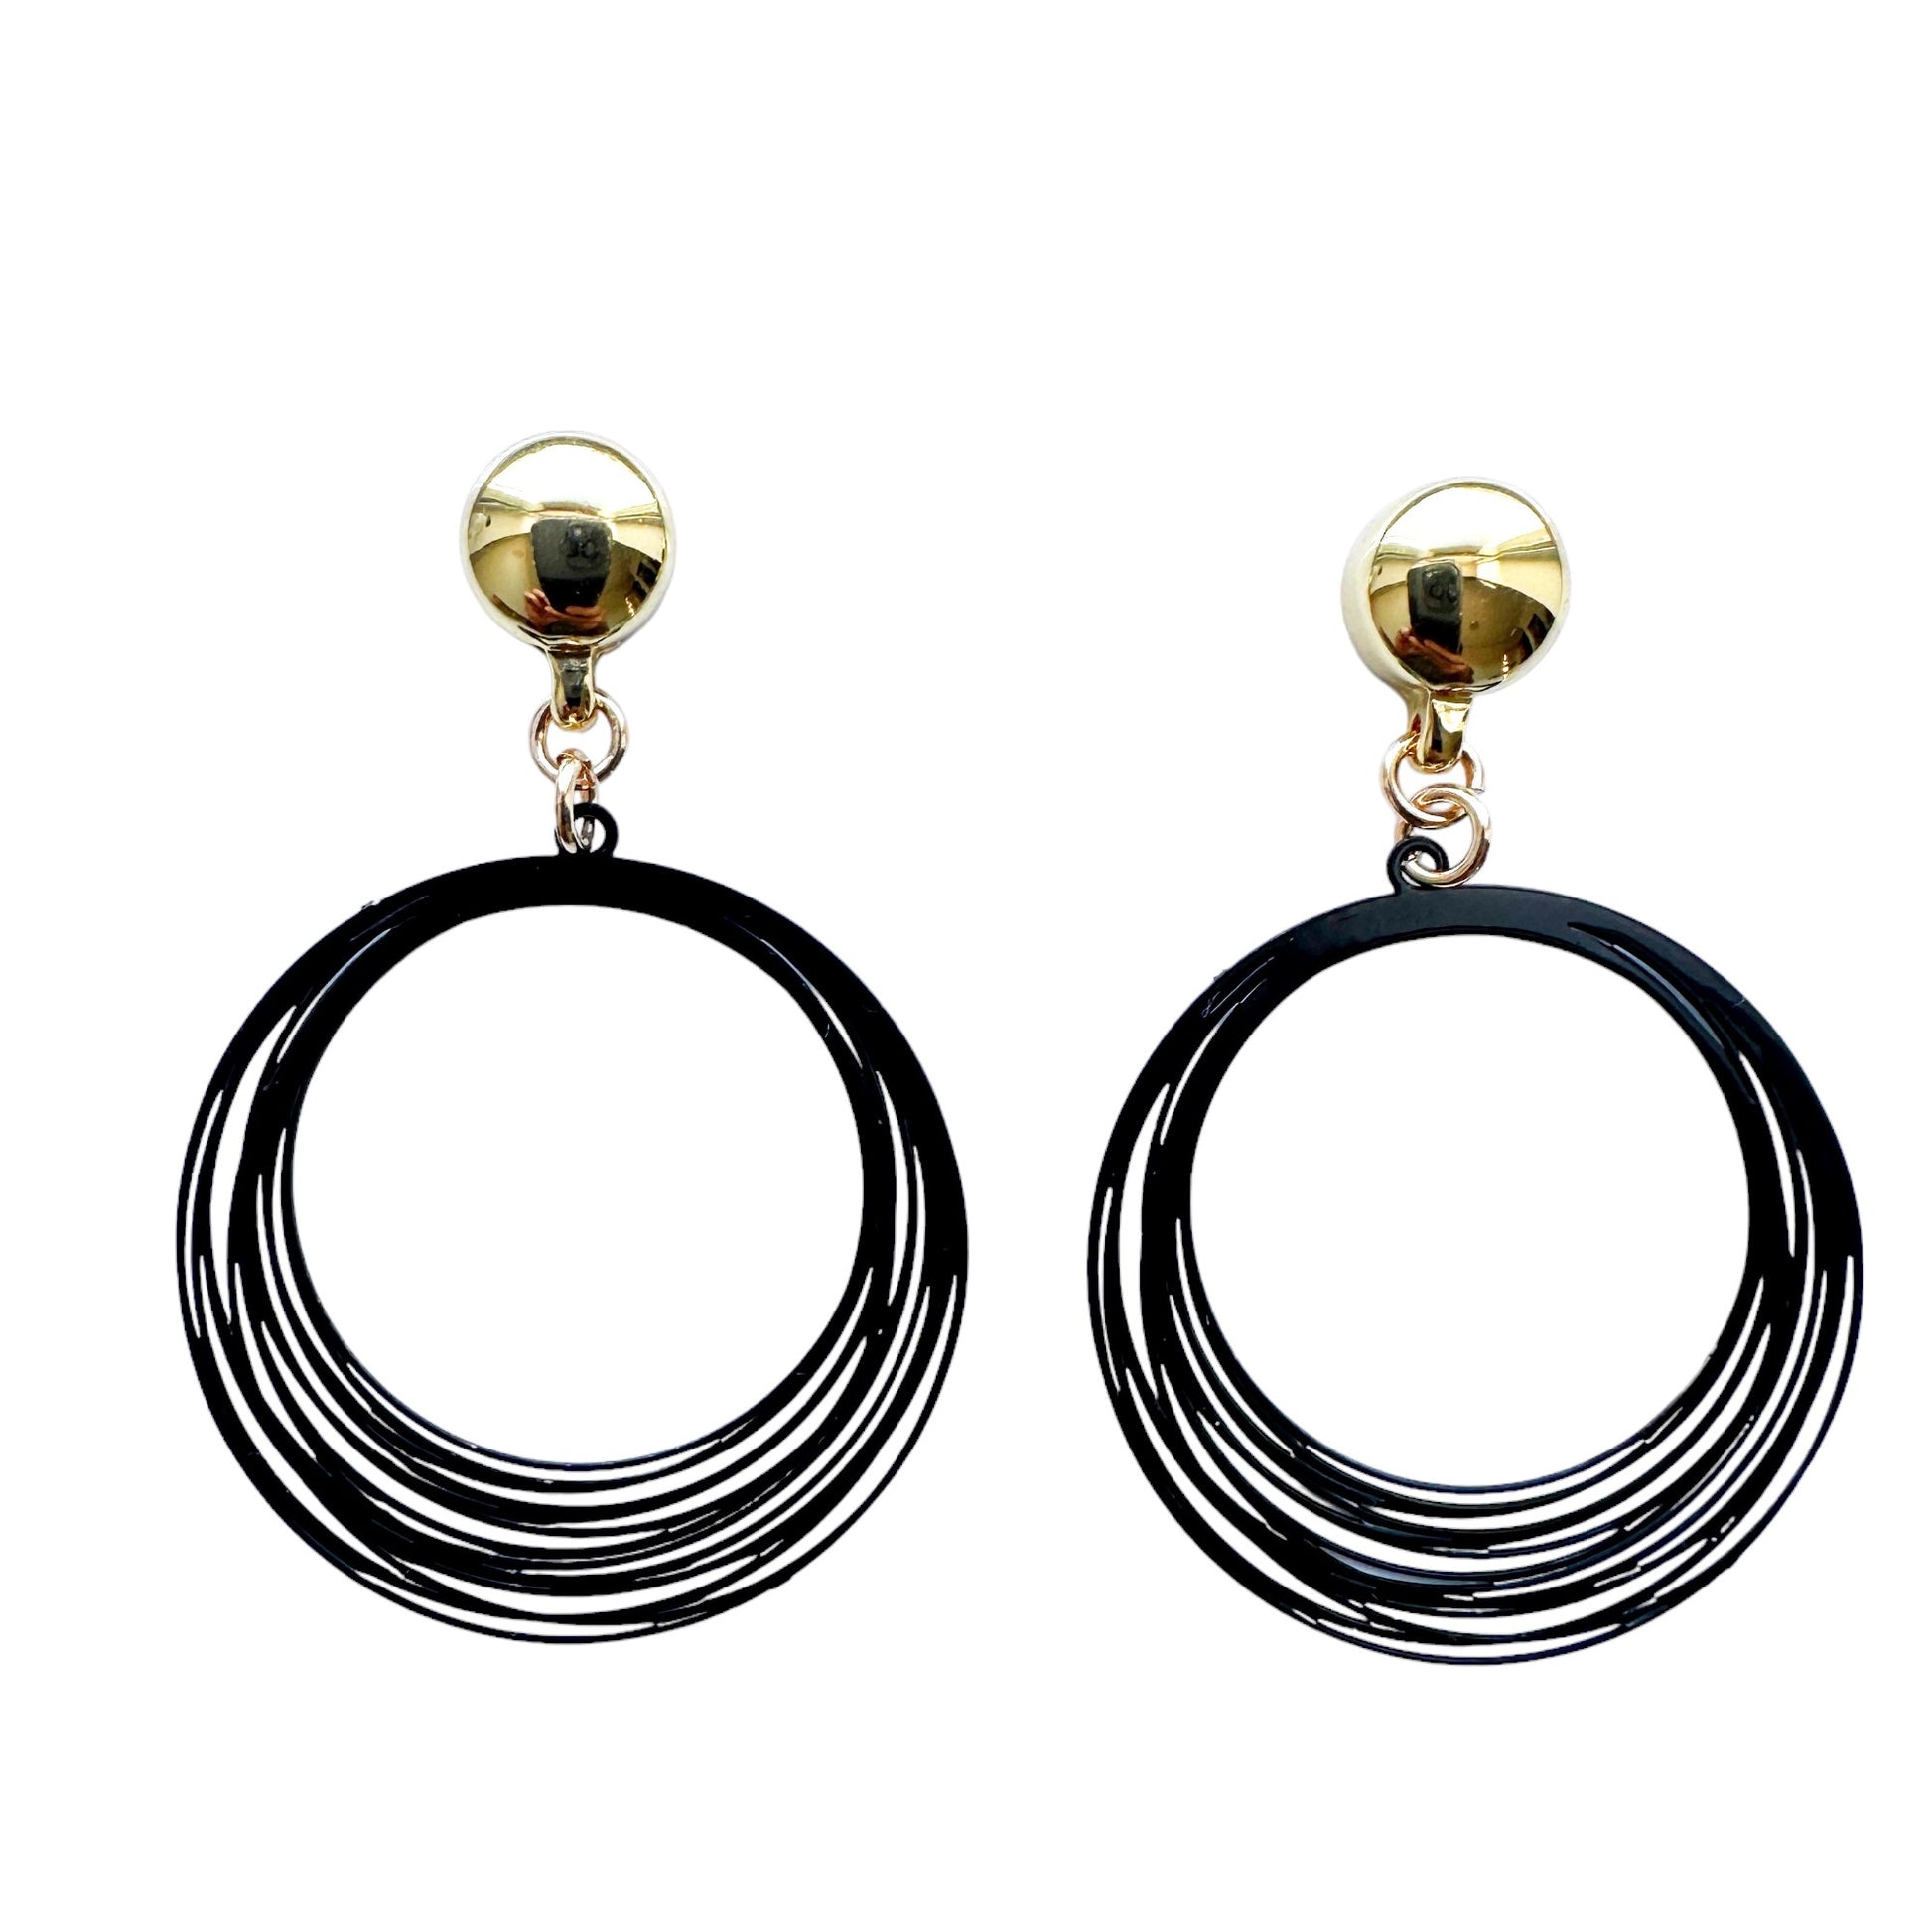 TI-GO Black / Red String Rings earring. Magnetic titanium interchangeable earring system. Detachable earrings for a truly hypoallergenic jewellery on a white background. black